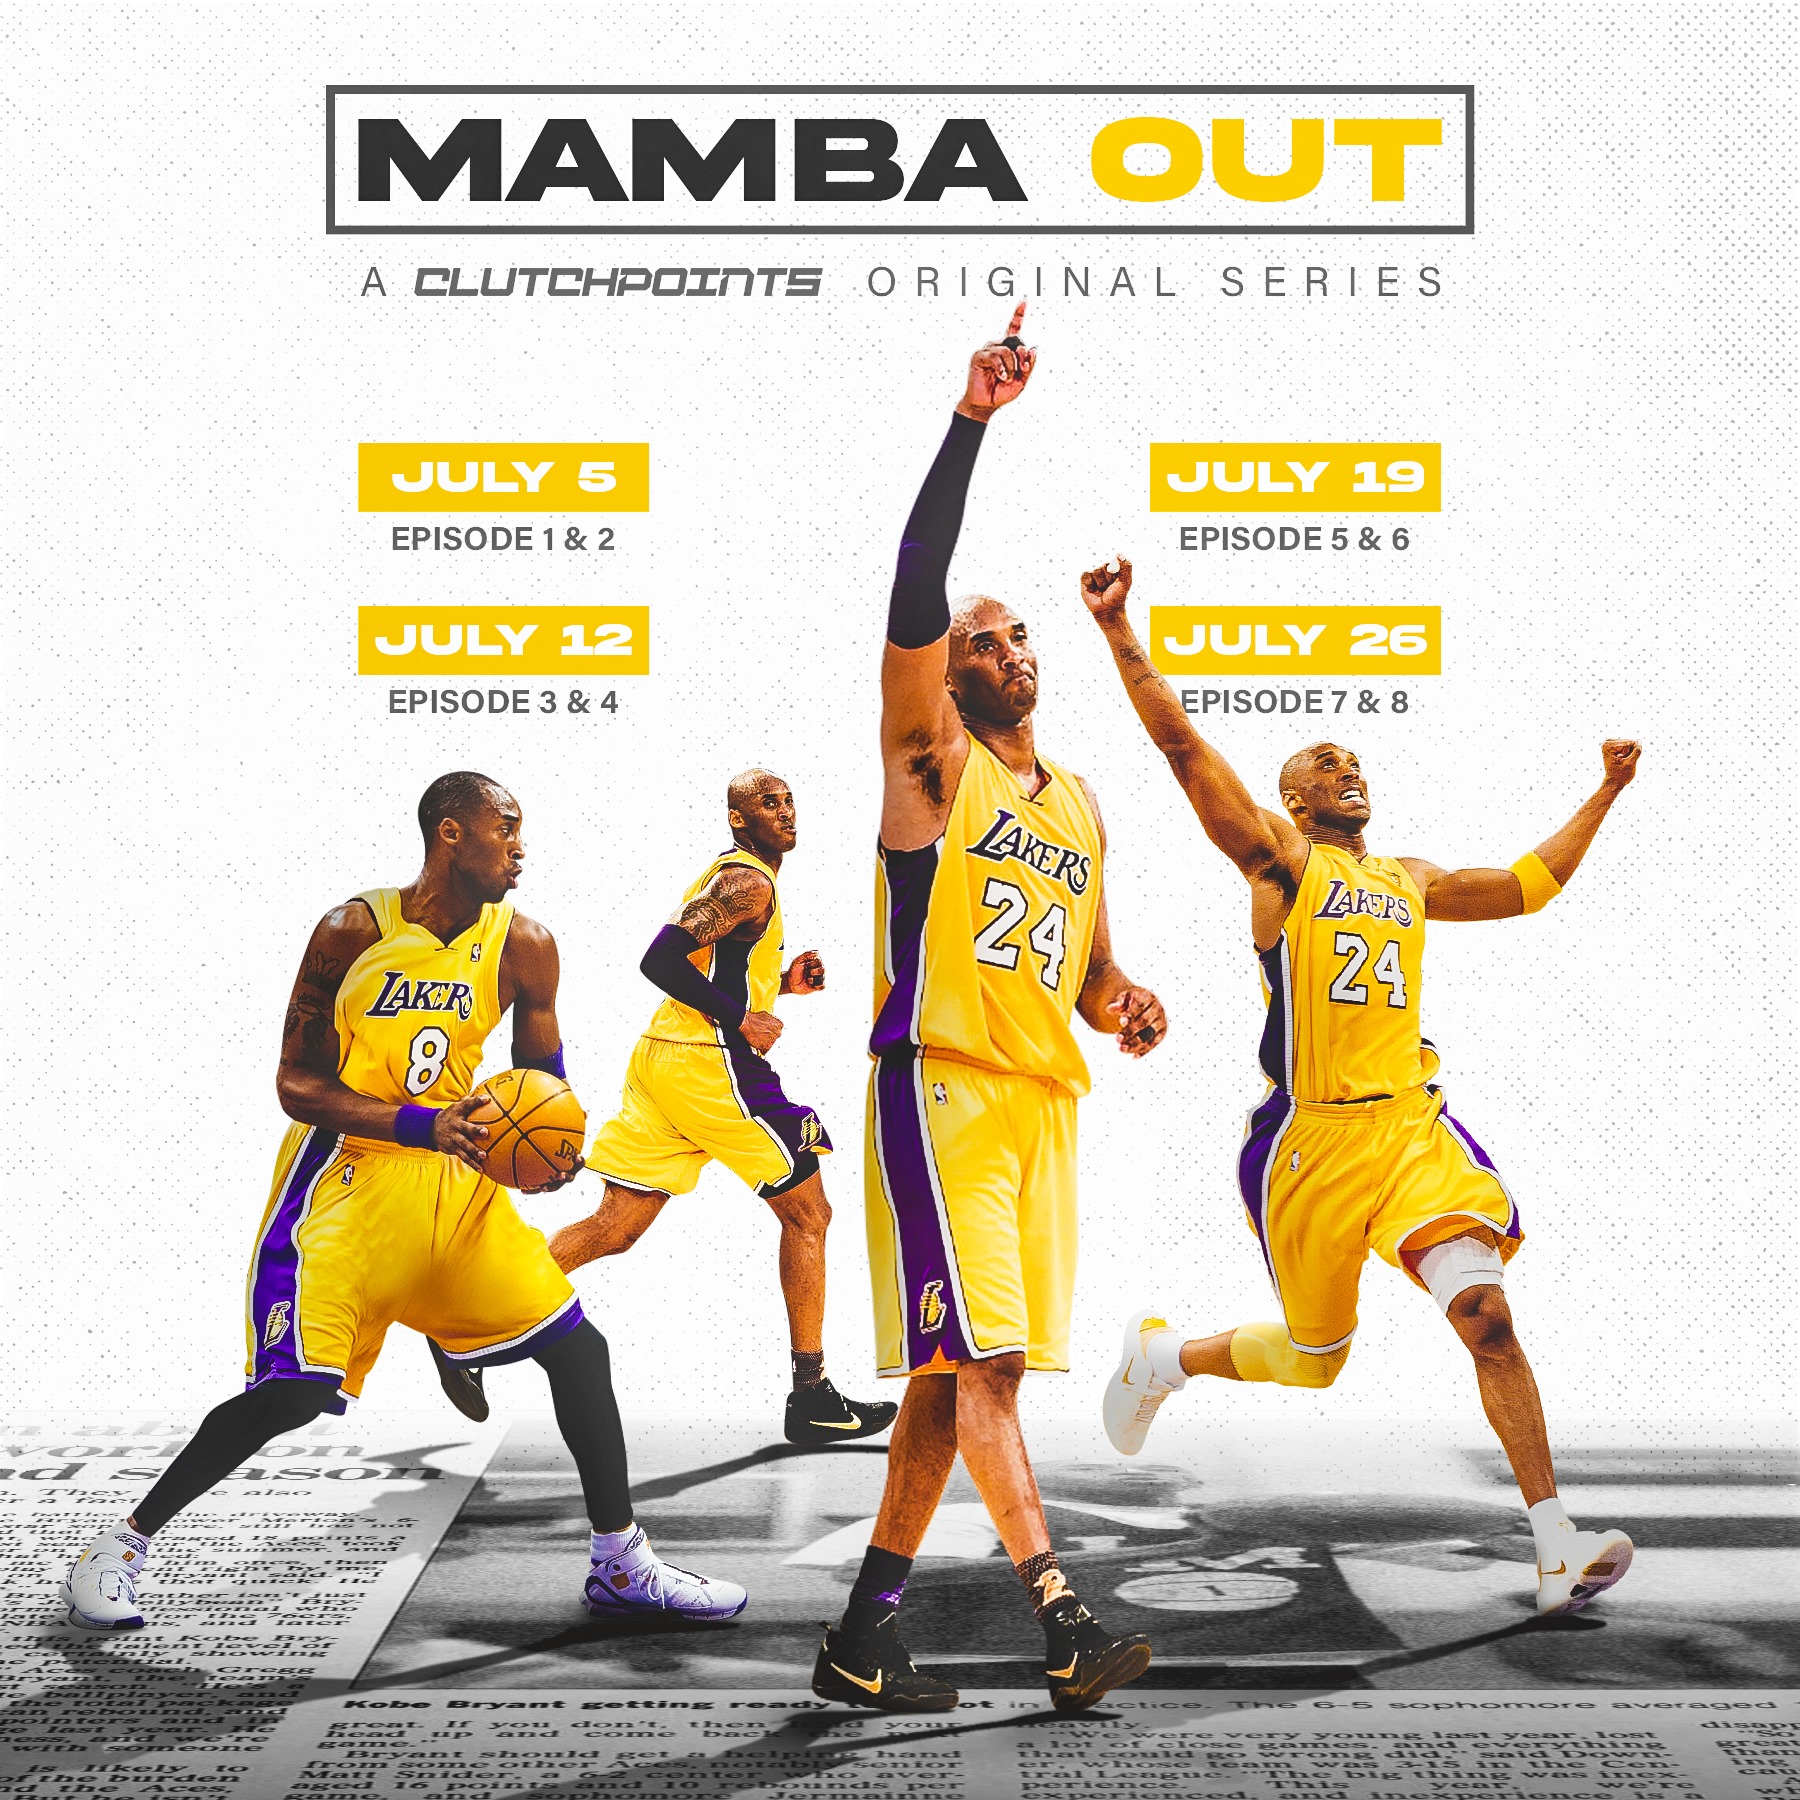 ESPN on X: So in the words of Kobe Bryant, 'Mamba Out,' but in